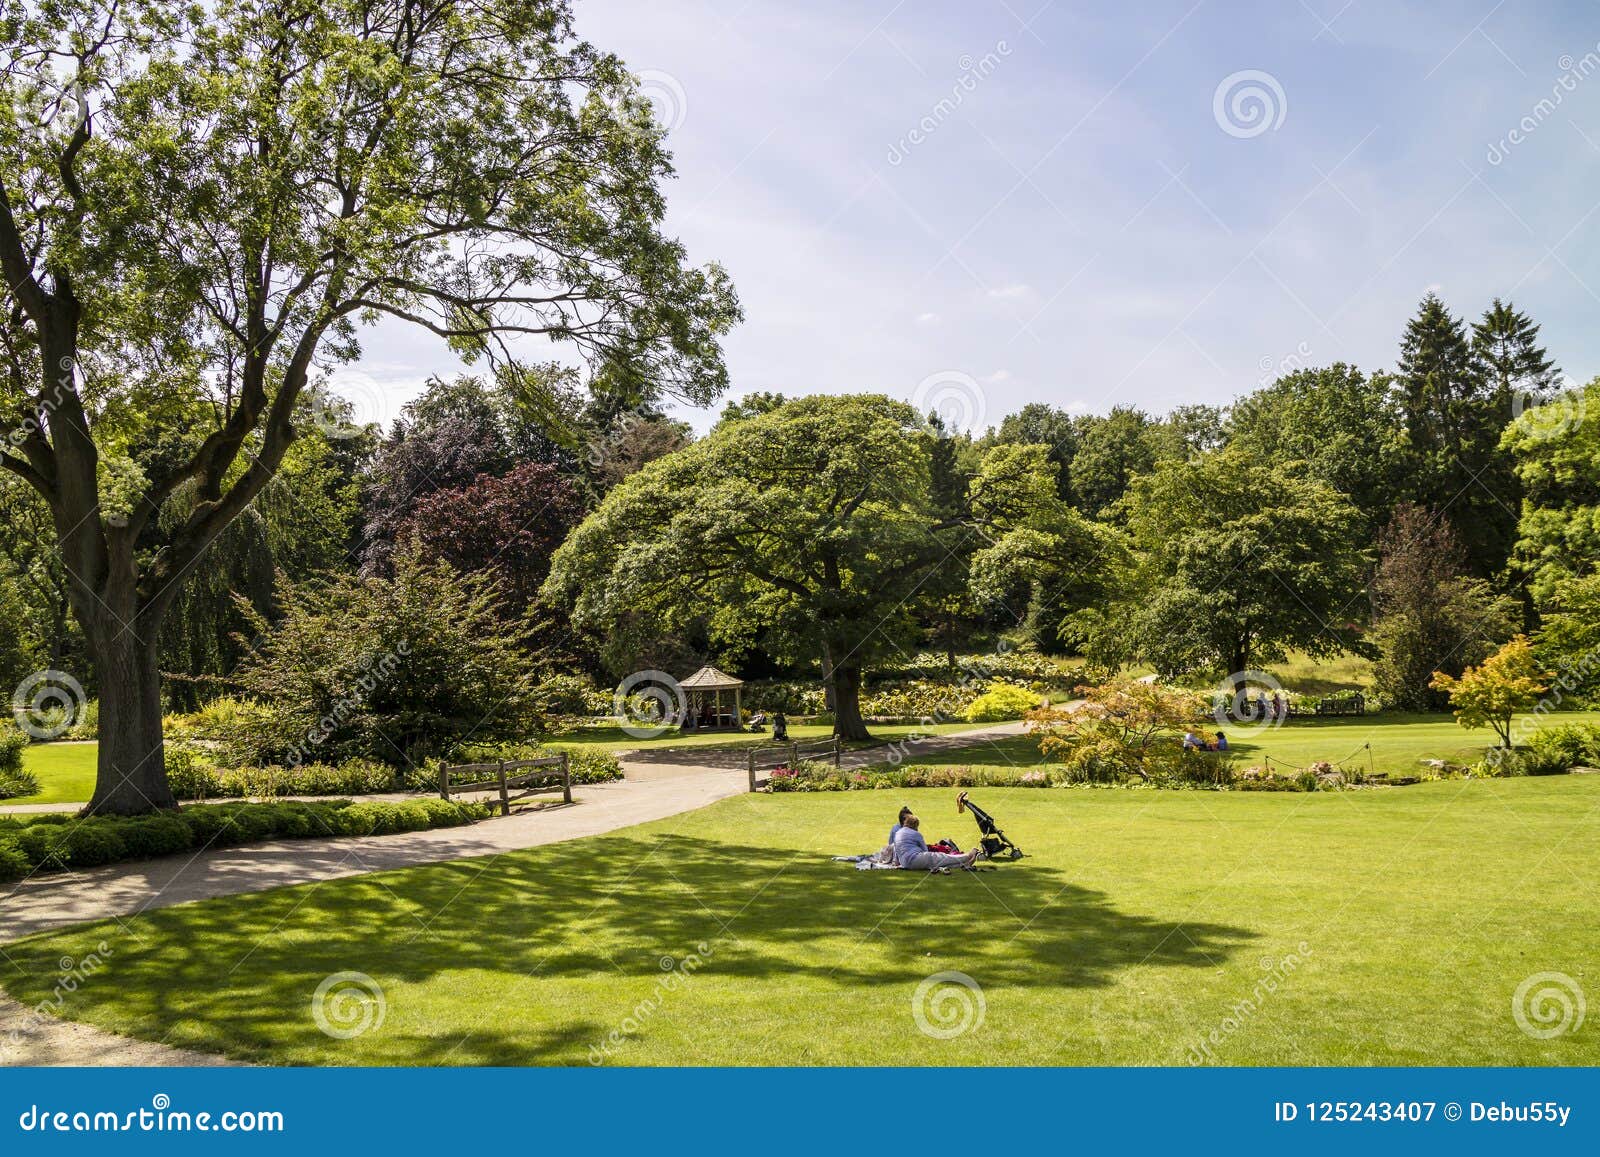 Large Green Lawn Area for Picnics in an English Park. Stock Image ...